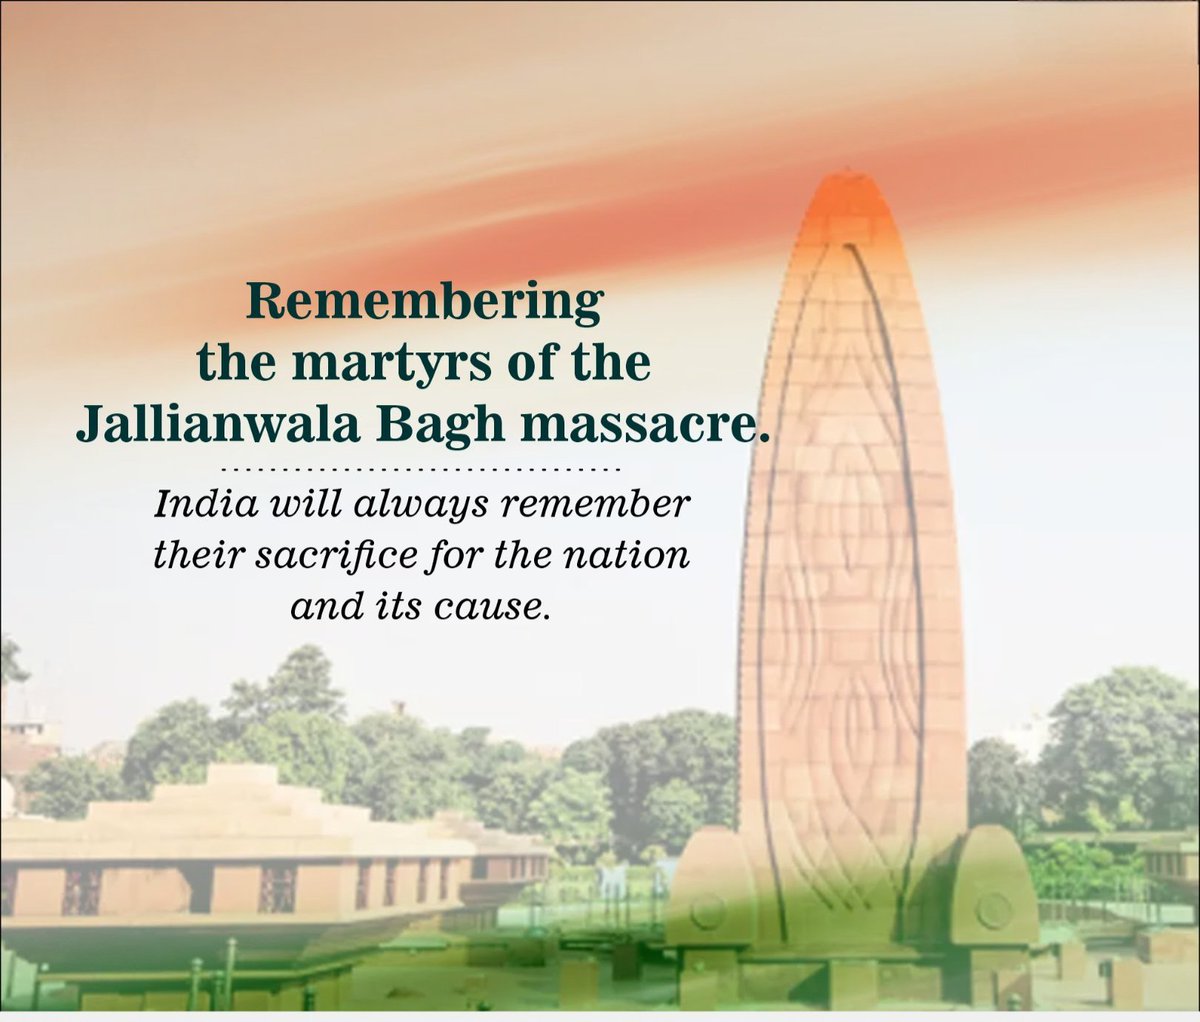 𝐉𝐚𝐥𝐥𝐢𝐚𝐧𝐰𝐚𝐥𝐚 𝐁𝐚𝐠𝐡, a symbol of Indian resilience, witnesses the valor and sacrifice of freedom fighters.

#JallianwalaBagh
#जलियांवालाबाग